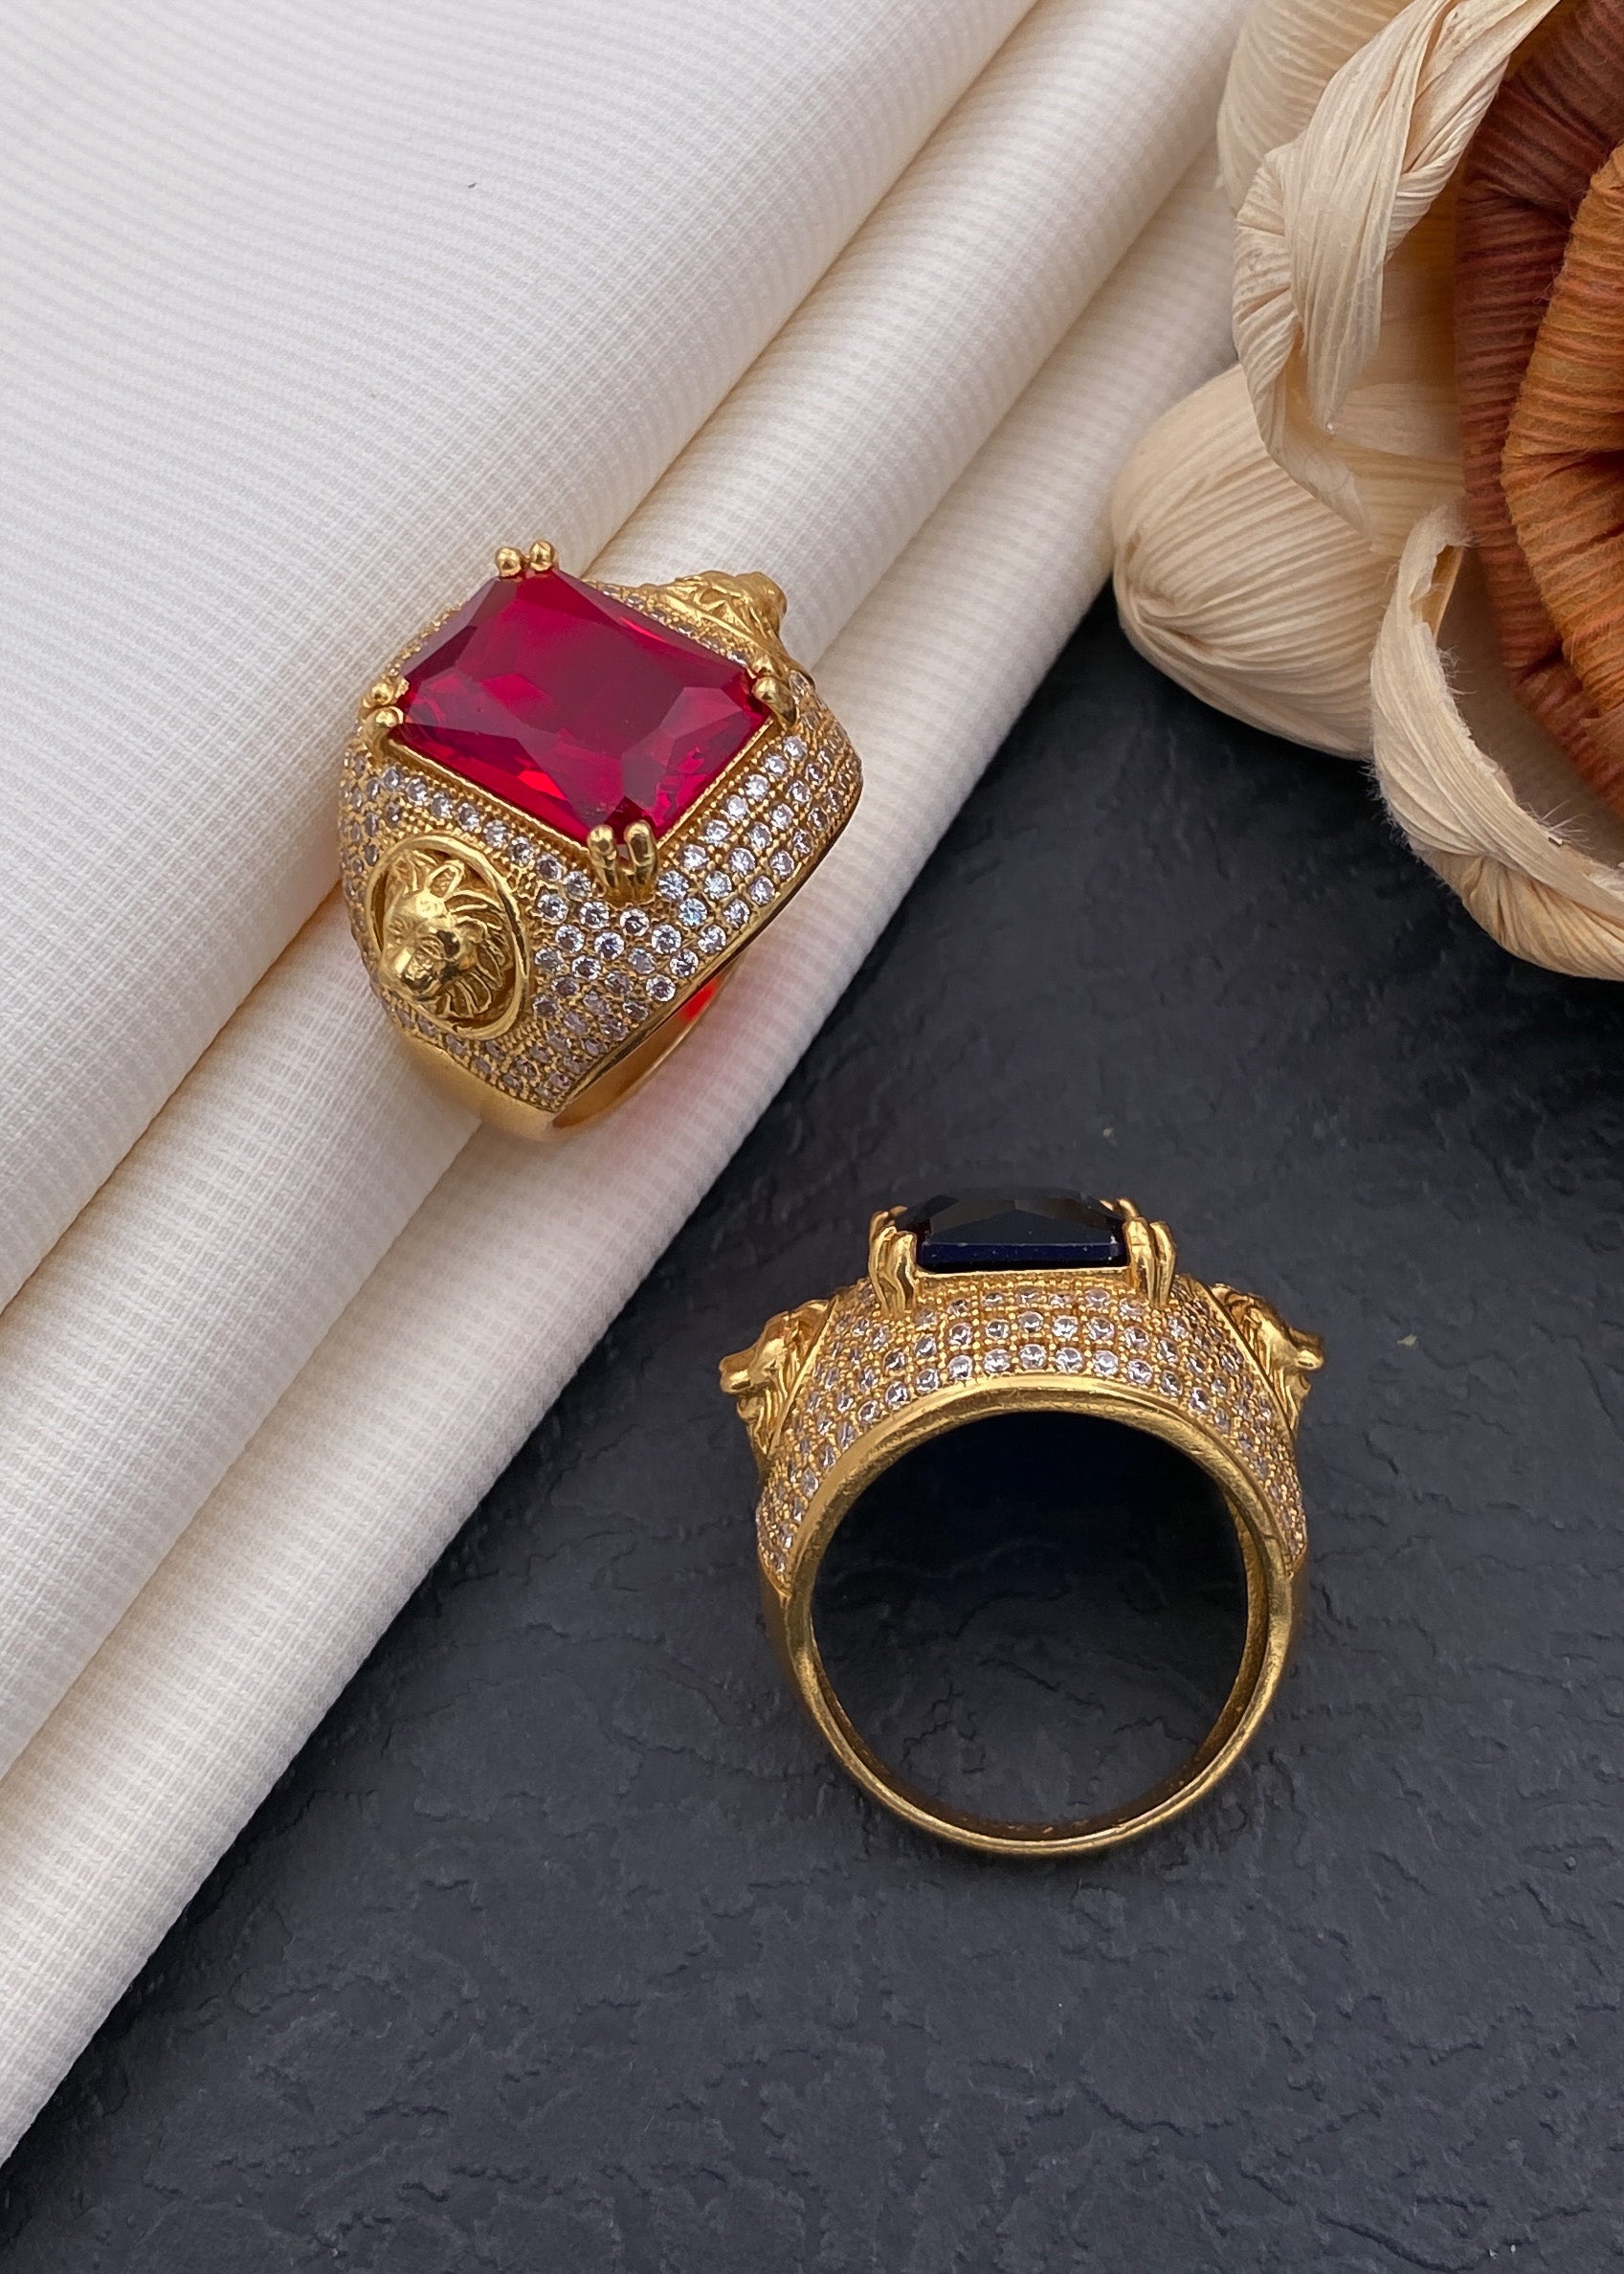 Buy Men's Gold Over Solid 925 Sterling Silver Rectangular Red Ruby Pinky  Ring Size 7, 8, 9, 10, 11, 12, 13 Online in India - Etsy